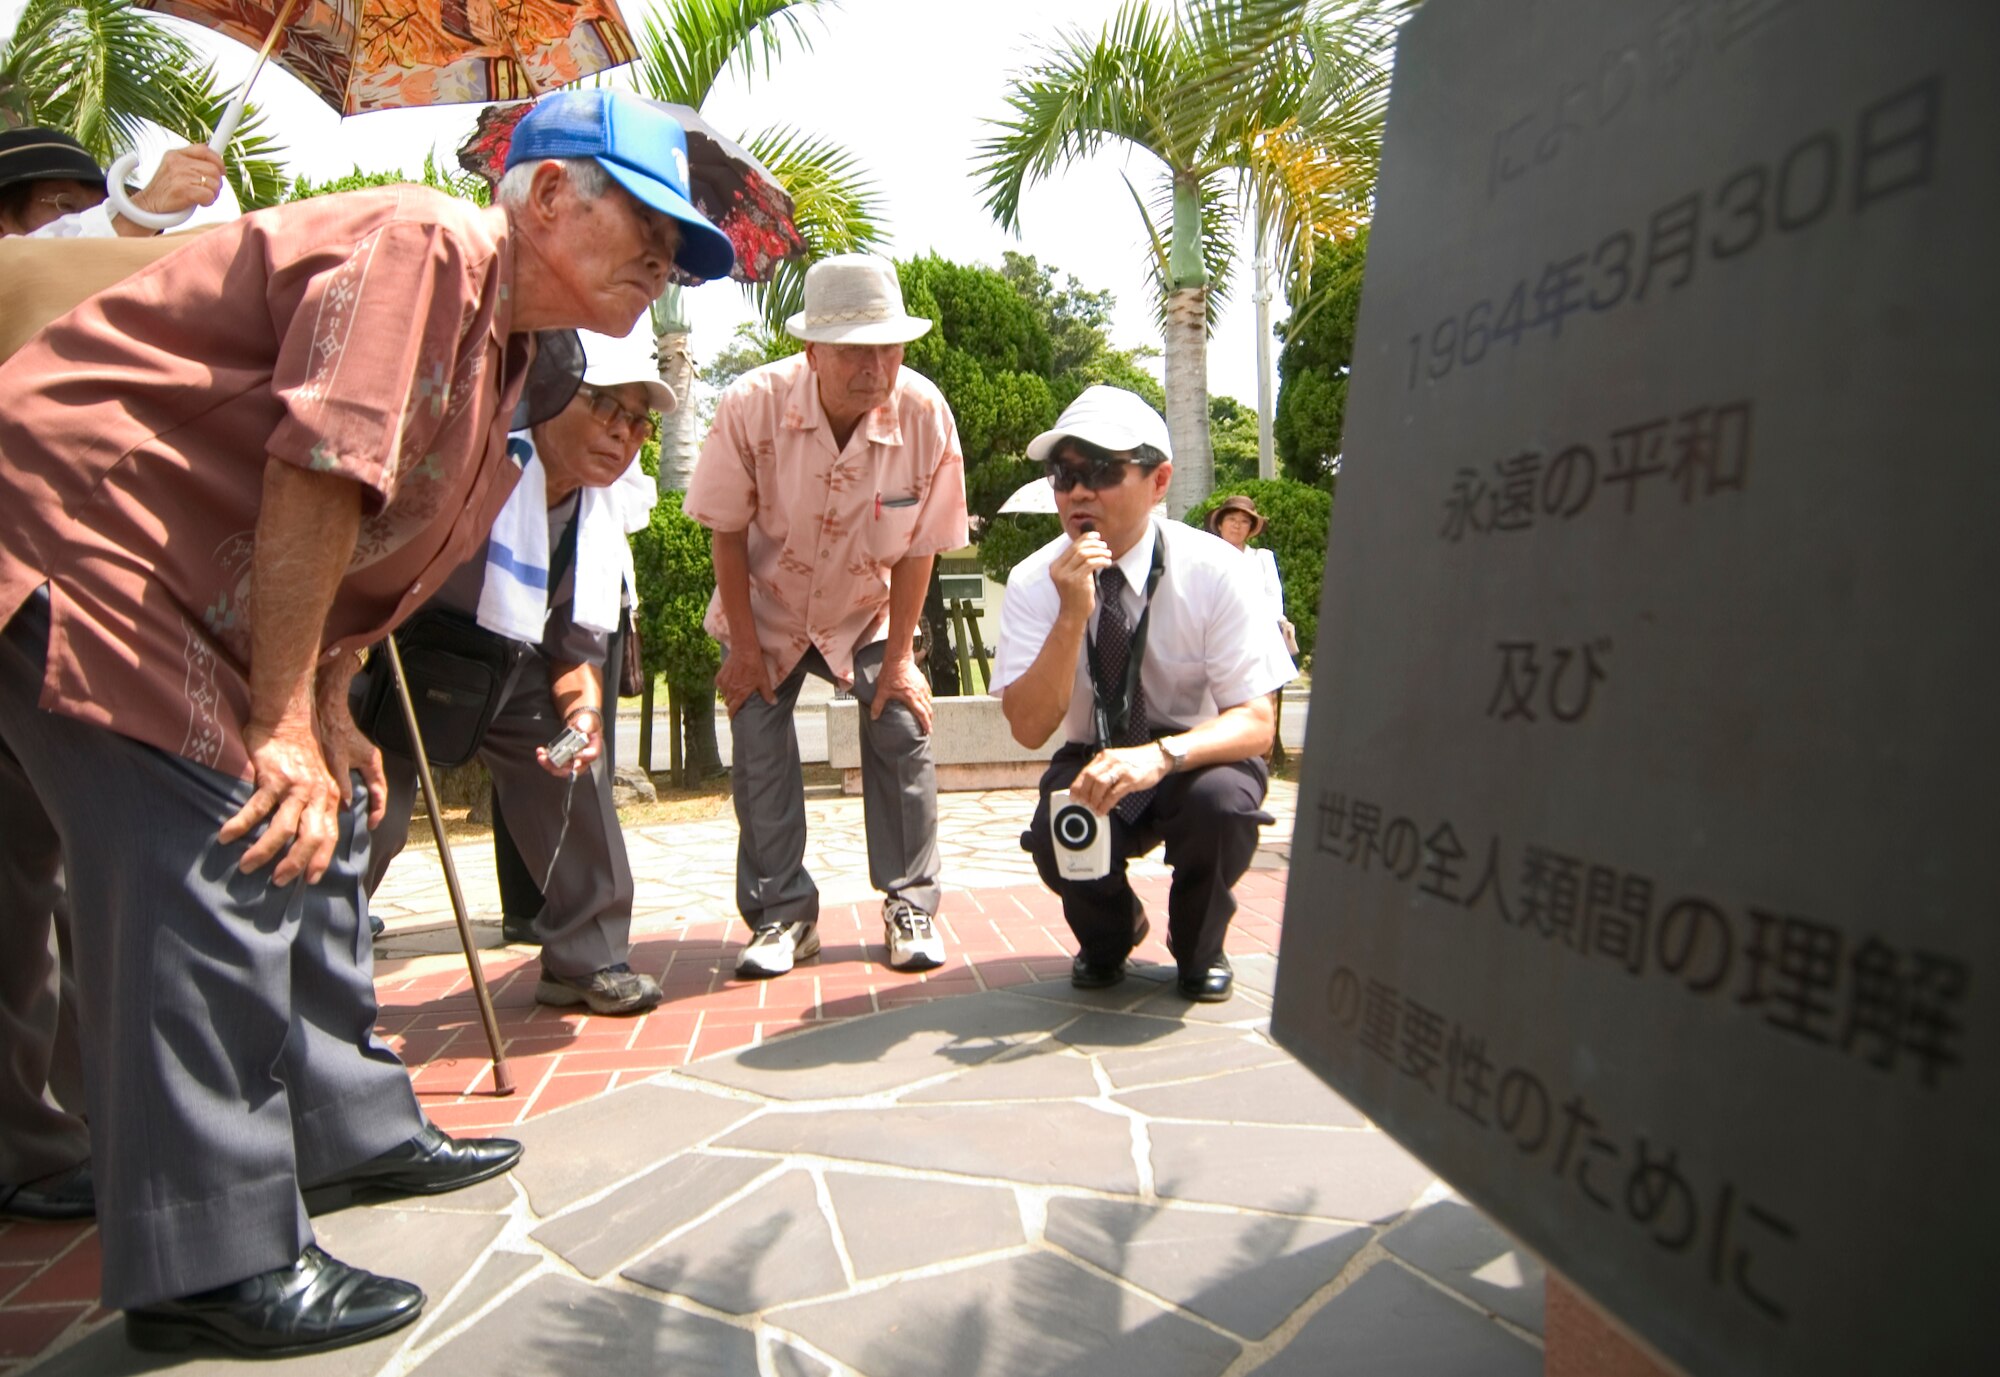 Hideaki Sakihama, 18th Public Affairs community relation specialist, reads to 90 visitors from a monument referring to Japan's surrender at Kadena Air Base, Japan July 23. The locals are from the Okinawa Prefectural Disabled Veterans Association visiting war-related sites such as the Peace Garden near the Youth Center and an old aircraft hanger near Gate 3. This group is very unique as they  served in the Imperial Japanese Army during the Battle of Okinawa, sustained  injuries in the war, and have been receiving military pensions from the Government of Japan. They were not directly deployed to Okinawa during the war, but drafted from here to serve in the Army.
(U.S. Air Force photo/Tech. Sgt. Rey Ramon)  